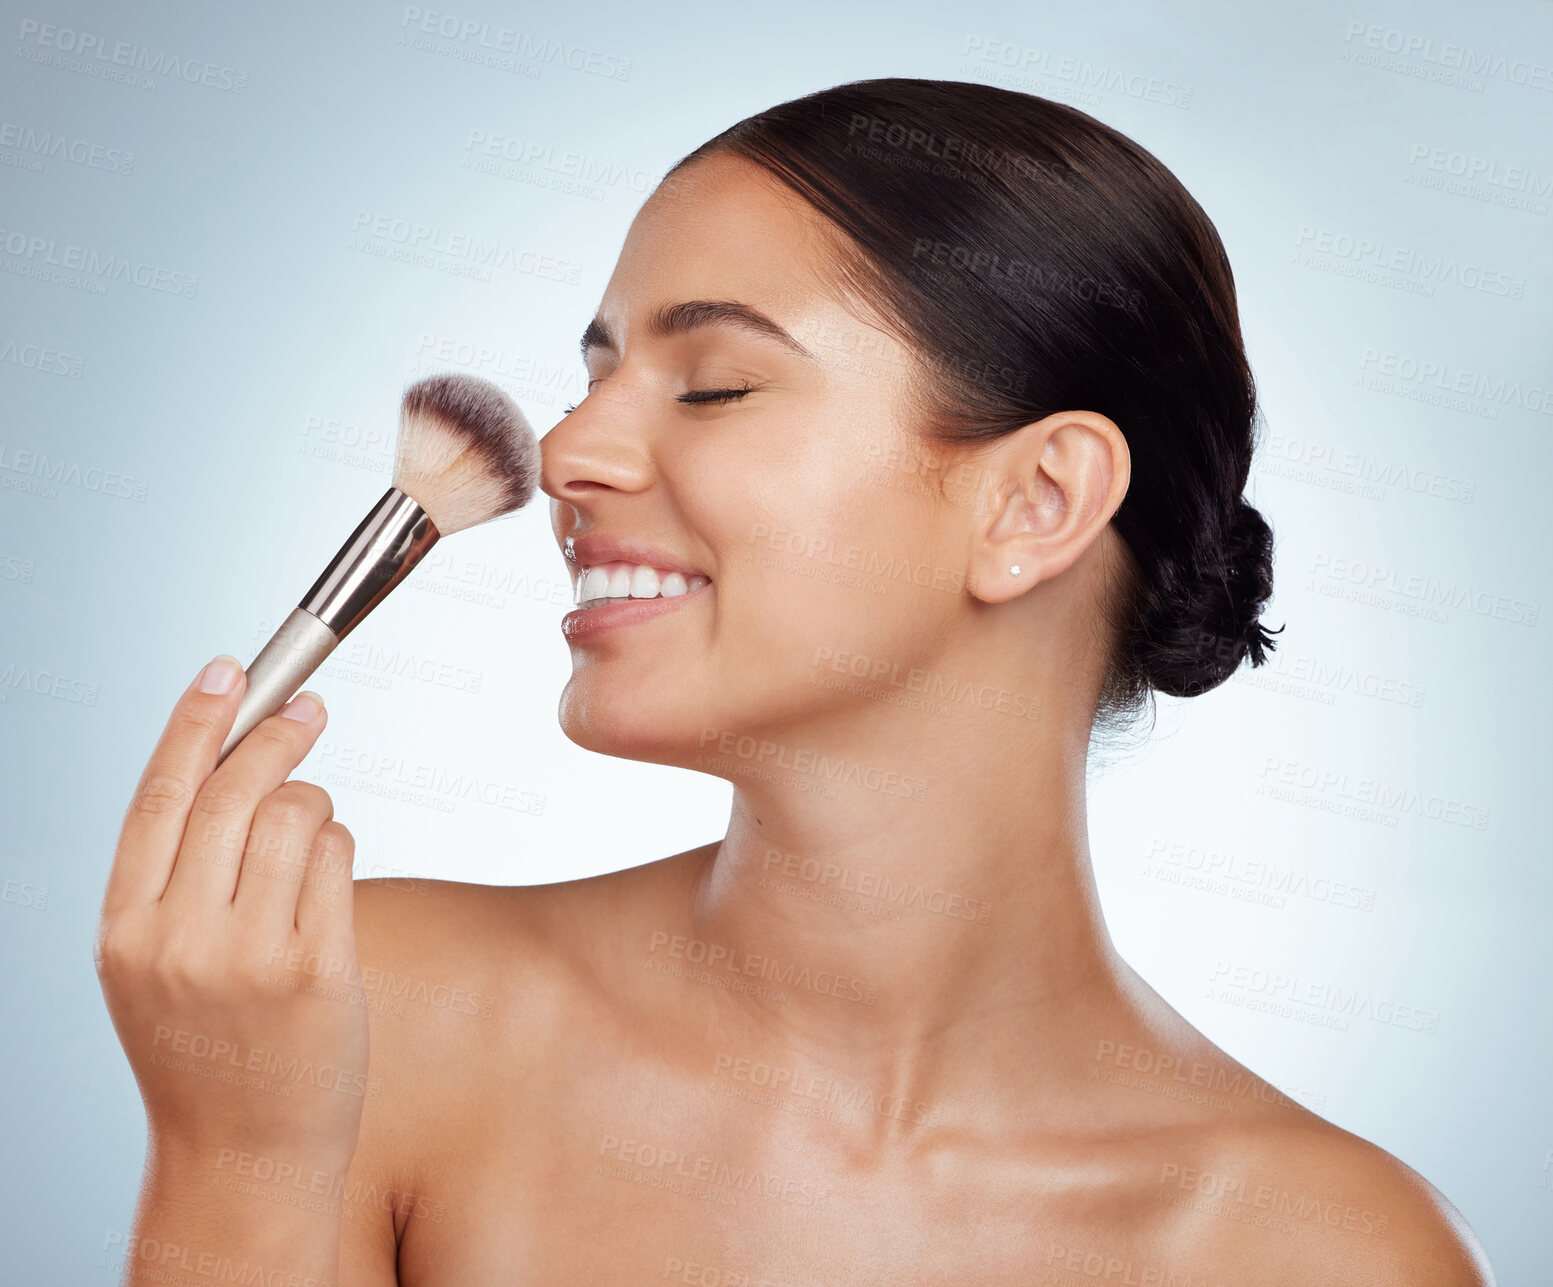 Buy stock photo Beautiful woman holding and using cosmetic makeup brush to apply blush makeup while posing with copyspace. Caucasian model isolated against grey studio background. Getting ready after skincare routine